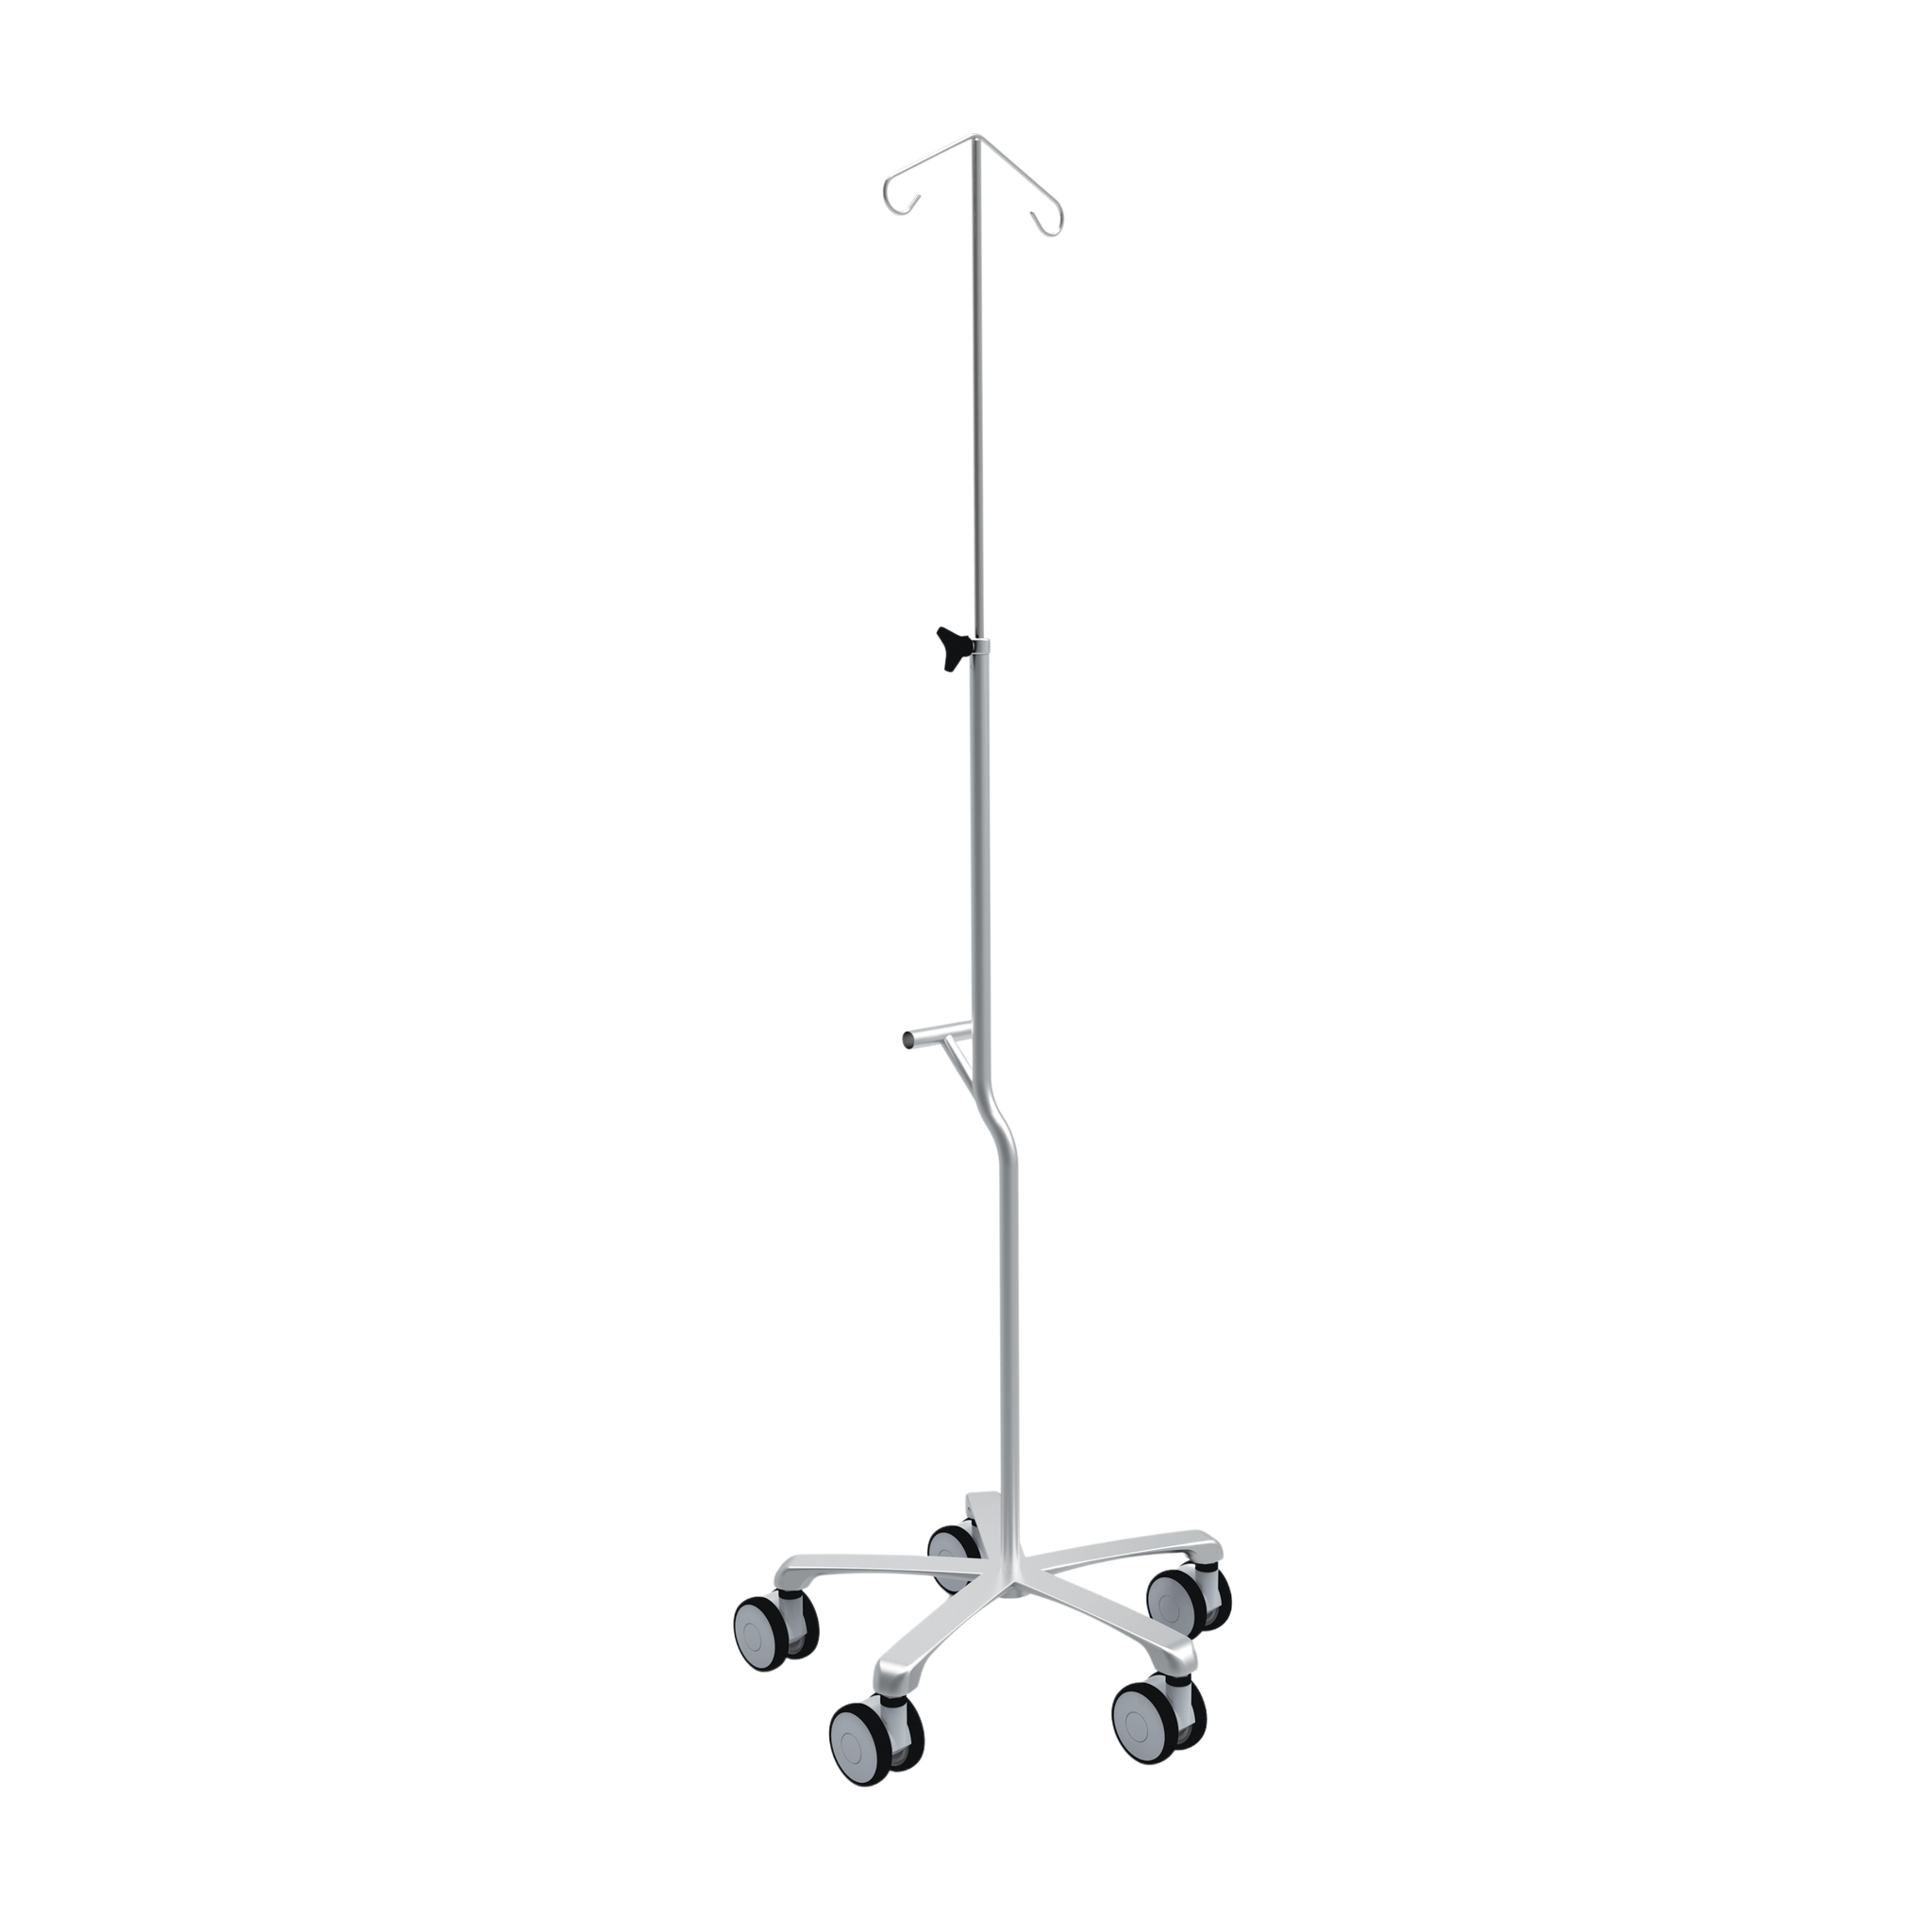 Transfusion Pump Stand - With Offset Pole, 4 Hook